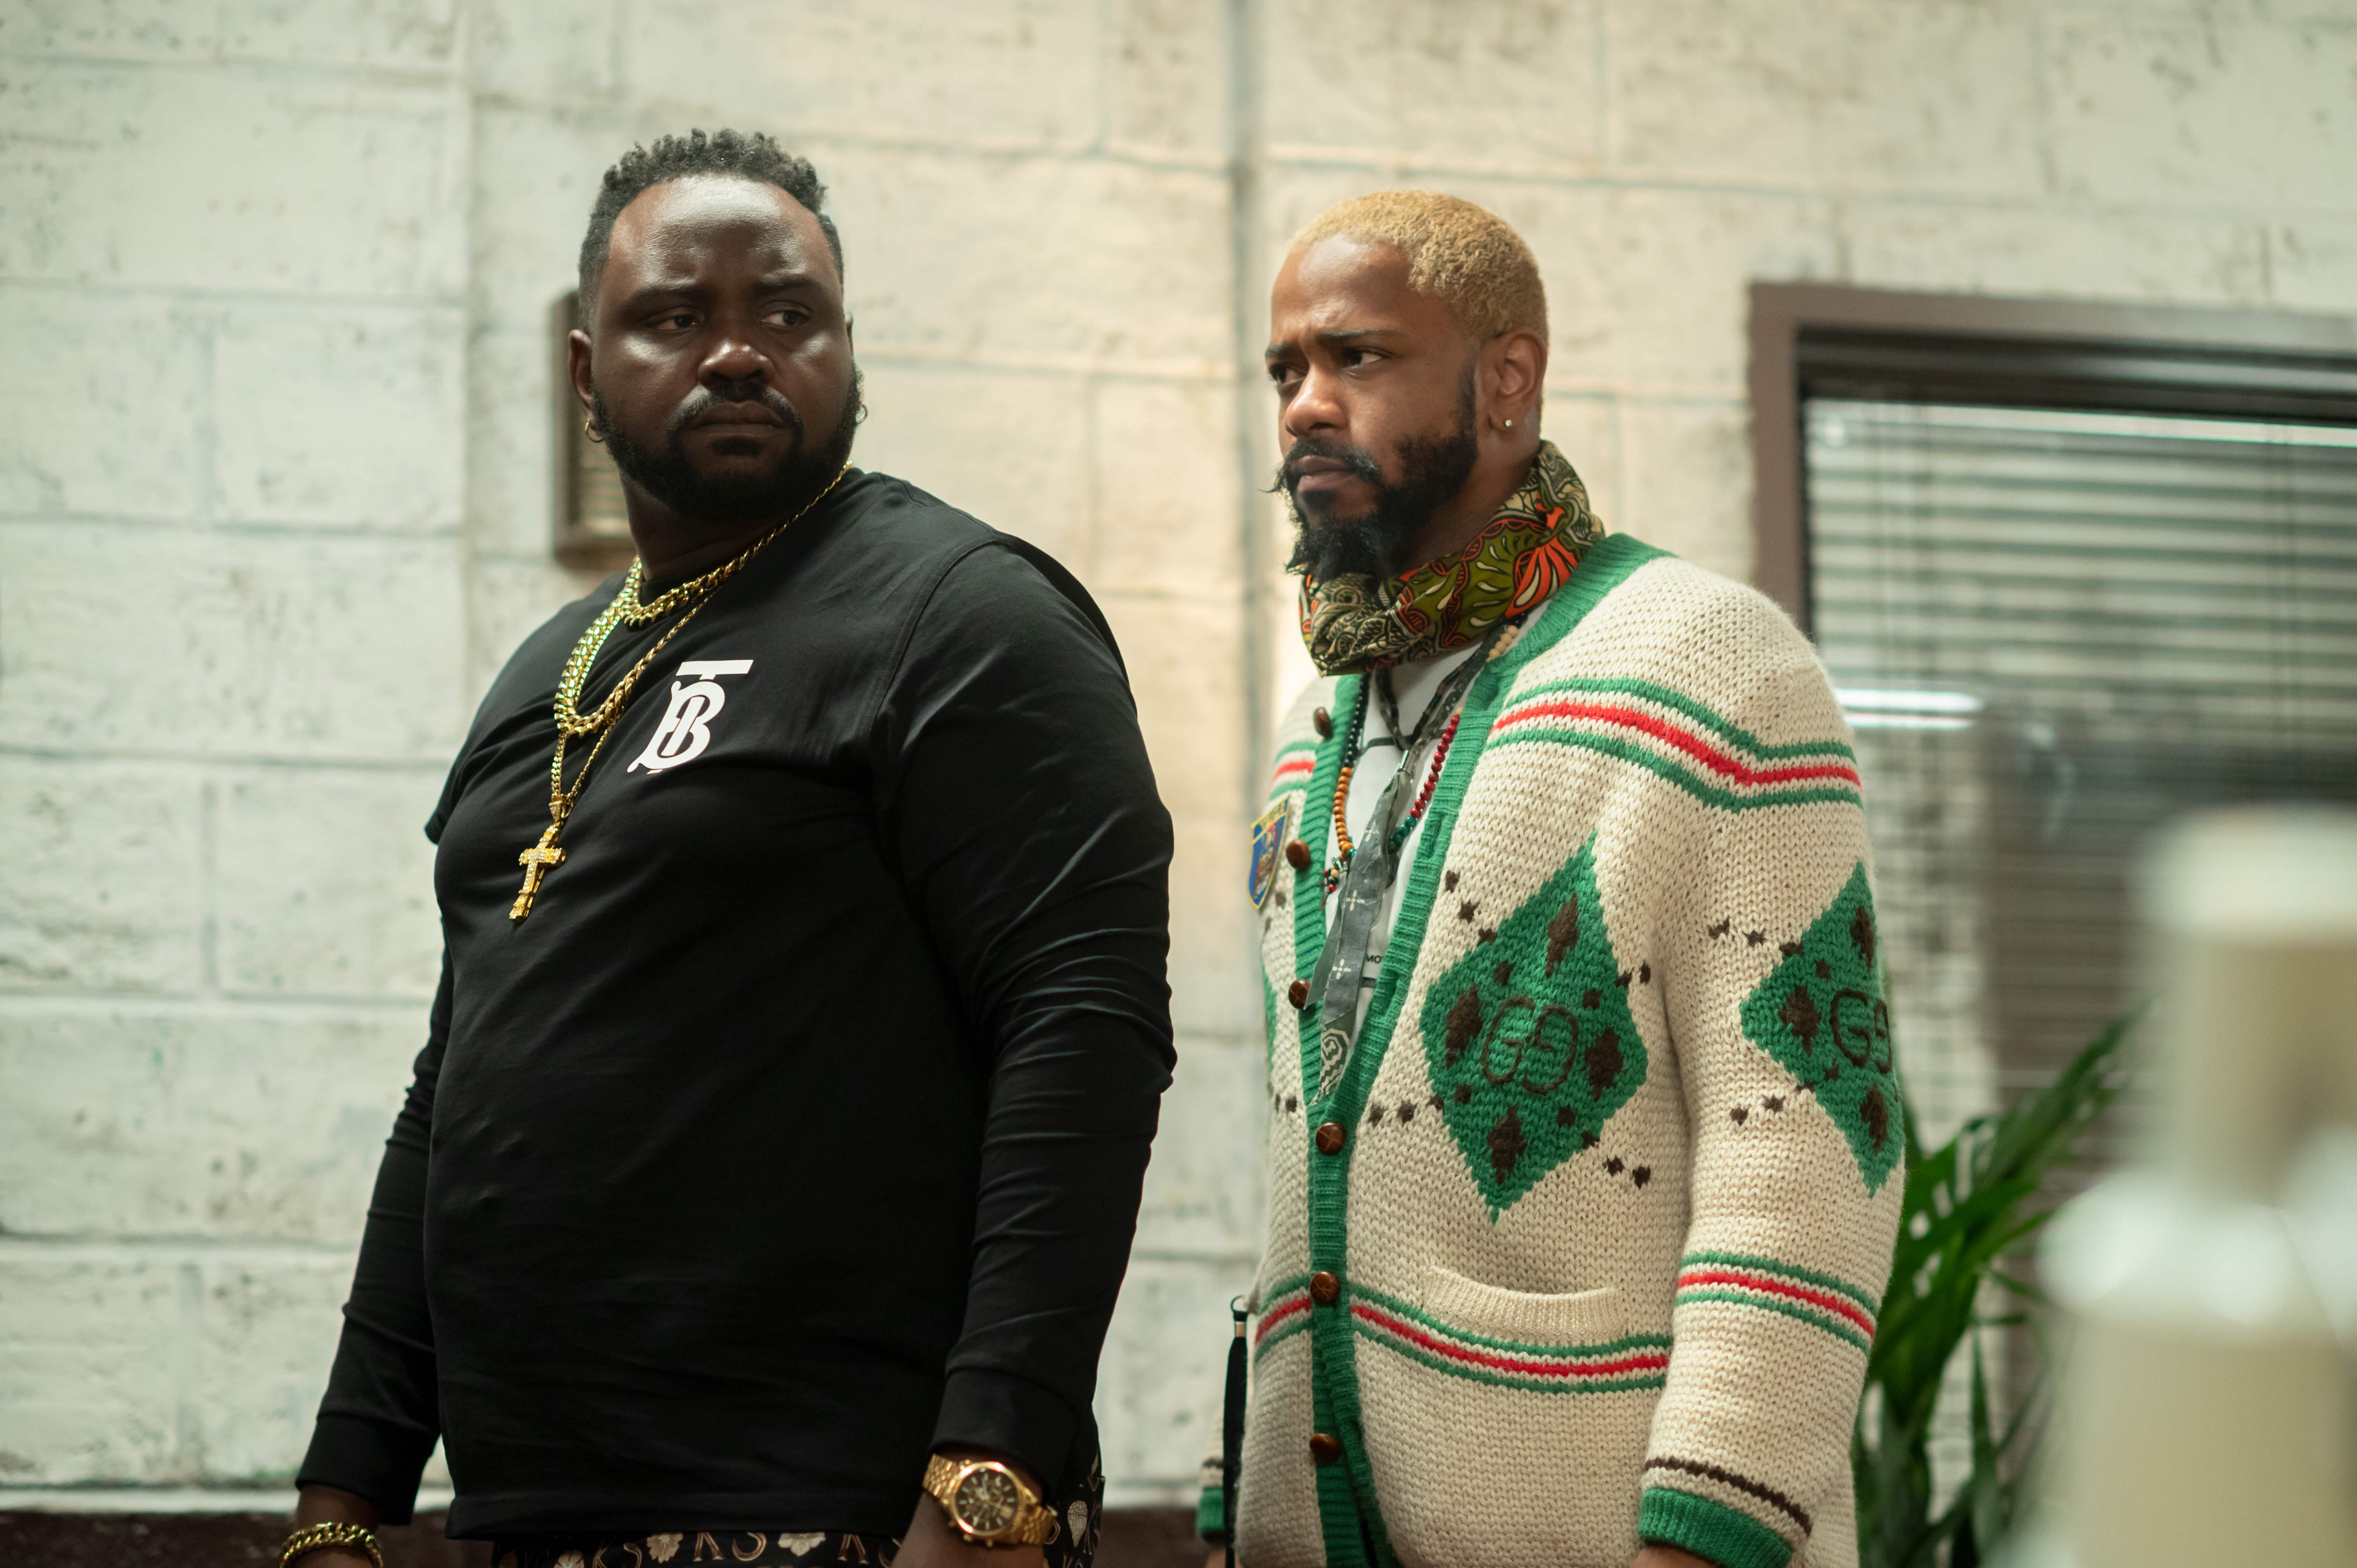 Brian Tryee Henry and LaKeith Stanfield in Donald Glover's FX surreal comedy-drama series, Atlanta, Season 3 Episode 5